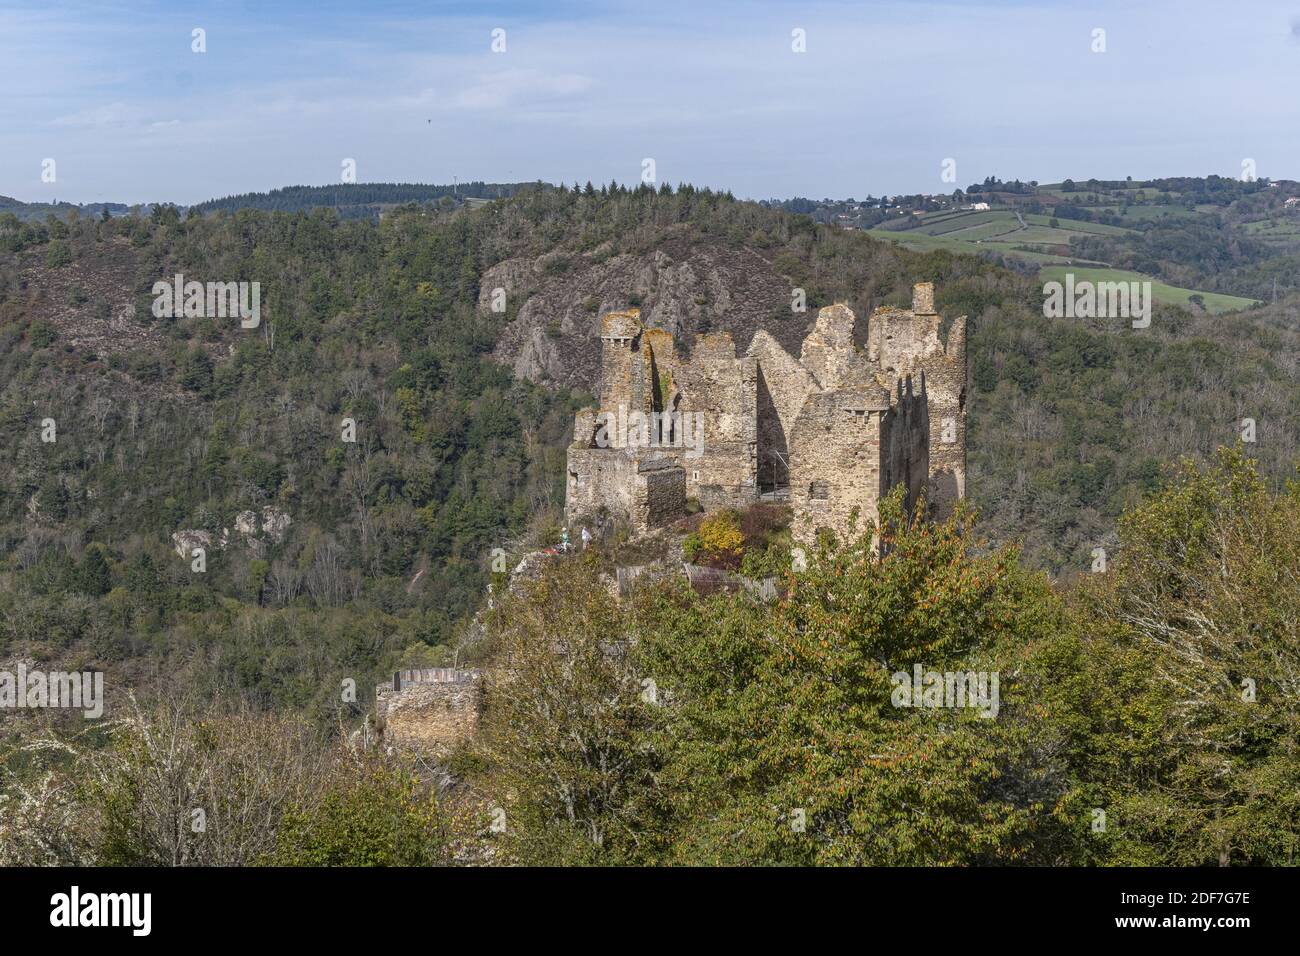 France, Puy de Dome, Saint Remy de Blot, Chateau Rocher, 12th century fortress overlooking the gorges of the Sioule (aerial view) Stock Photo